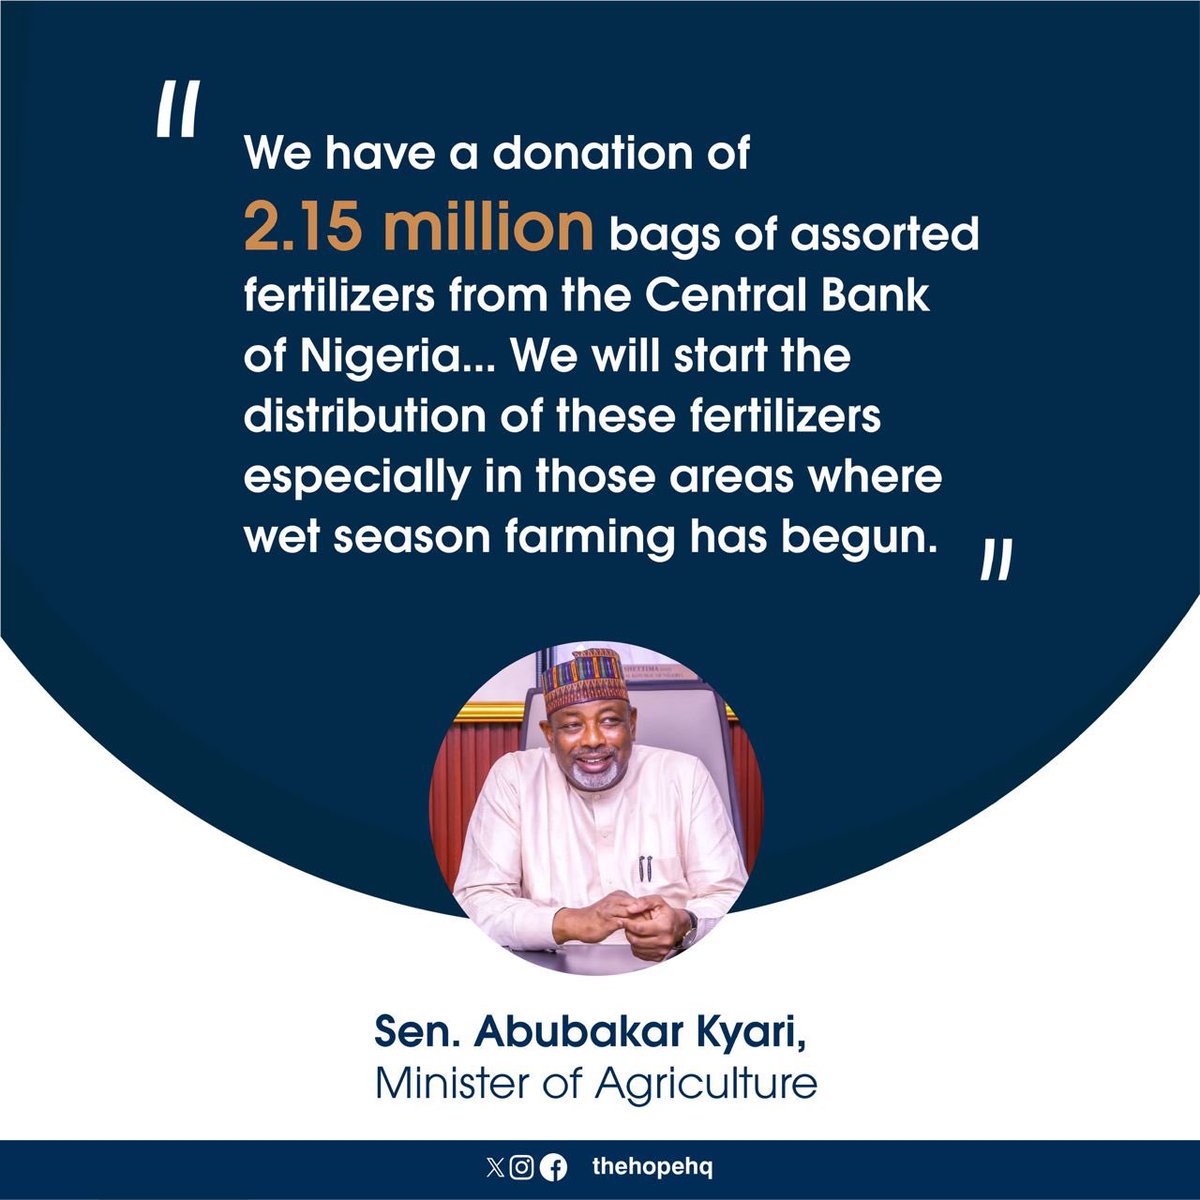 Great News Nigerians; The Federal government through the office of the Minister of Agriculture, Senator. Abubakar Kyari is set to distribute the donated fertilizers by CBN for the ongoing wet season planting to farmers across the 36 states including FCT. This is one of the